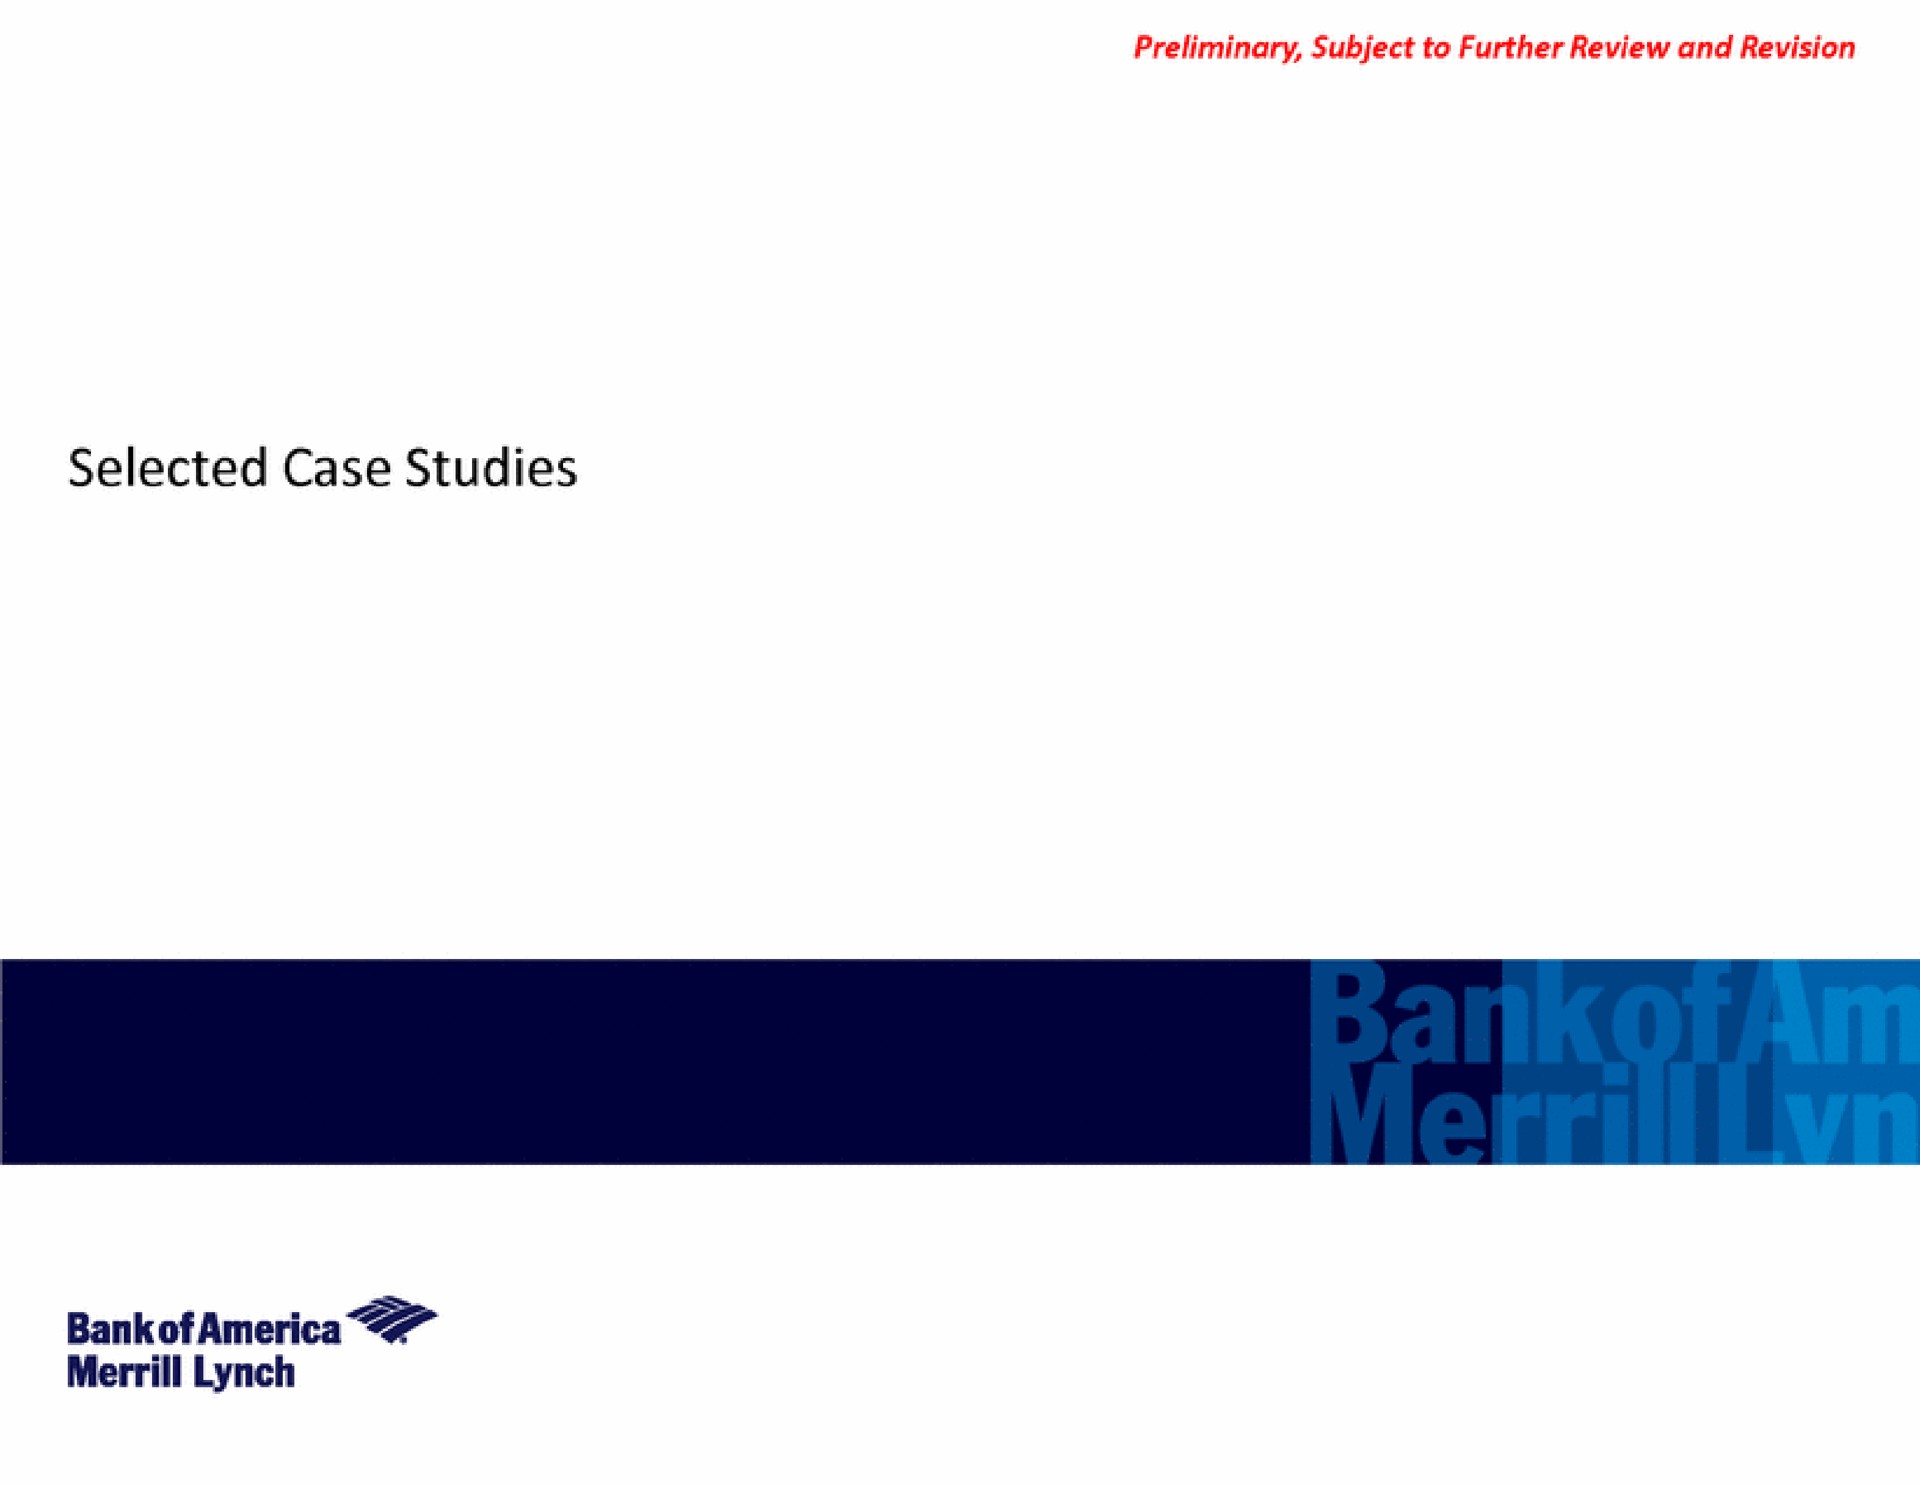 selected case studies lynch | Bank of America